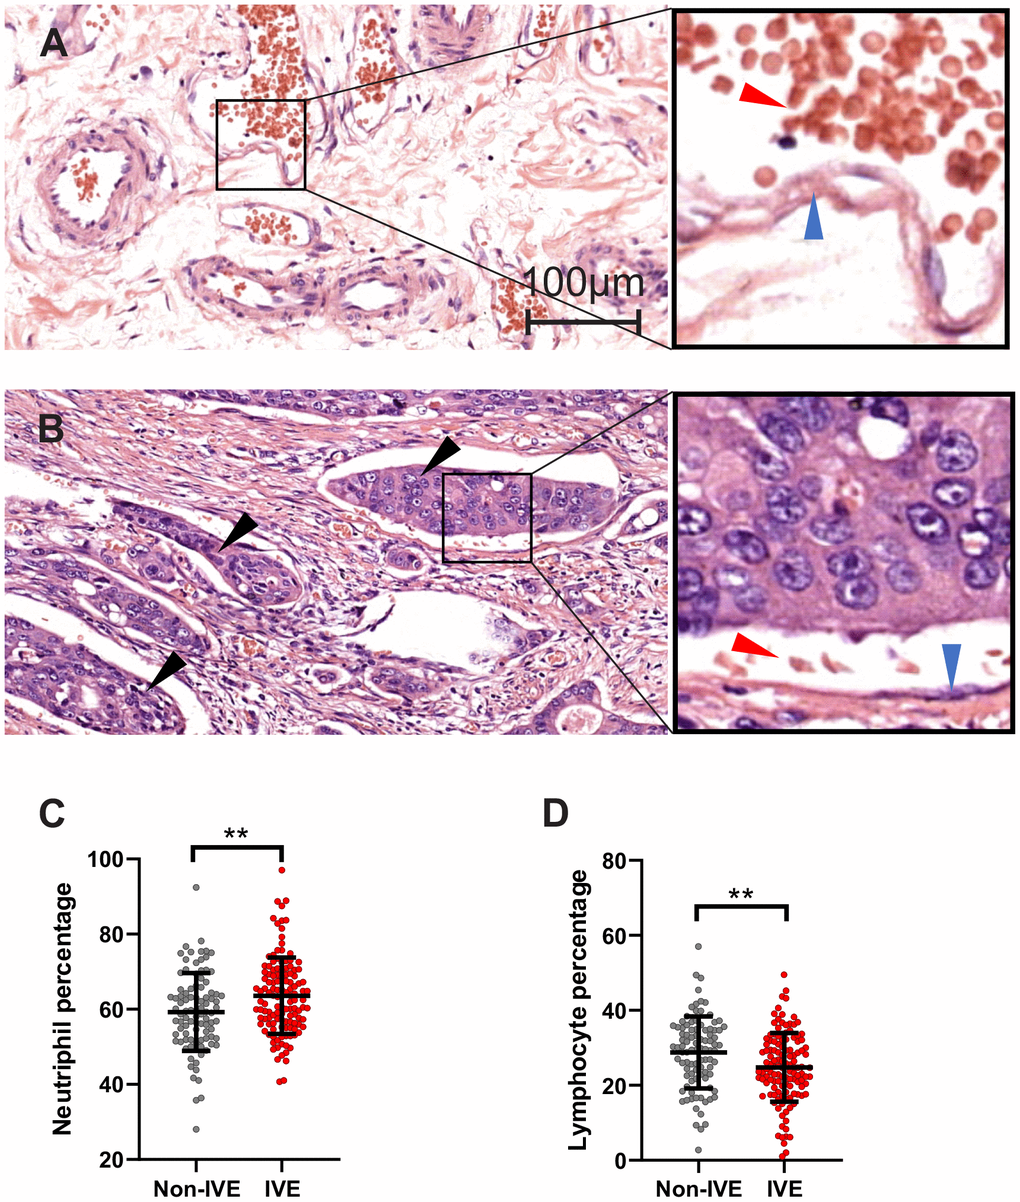 IVE related to peripheral lymphocyte and neutrophil percentage. (A, B) representative H&E staining images of cancer tissue without IVE (A) and with IVE (B). IVE is indicated by black arrows, the wall of vessels and red cells are indicated by blue arrows and red arrows, respectively. (C, D) IVE patients had higher neutrophil percentage (C) and lower lymphocyte percentage (D) relative to non-IVE patients. (**, P 